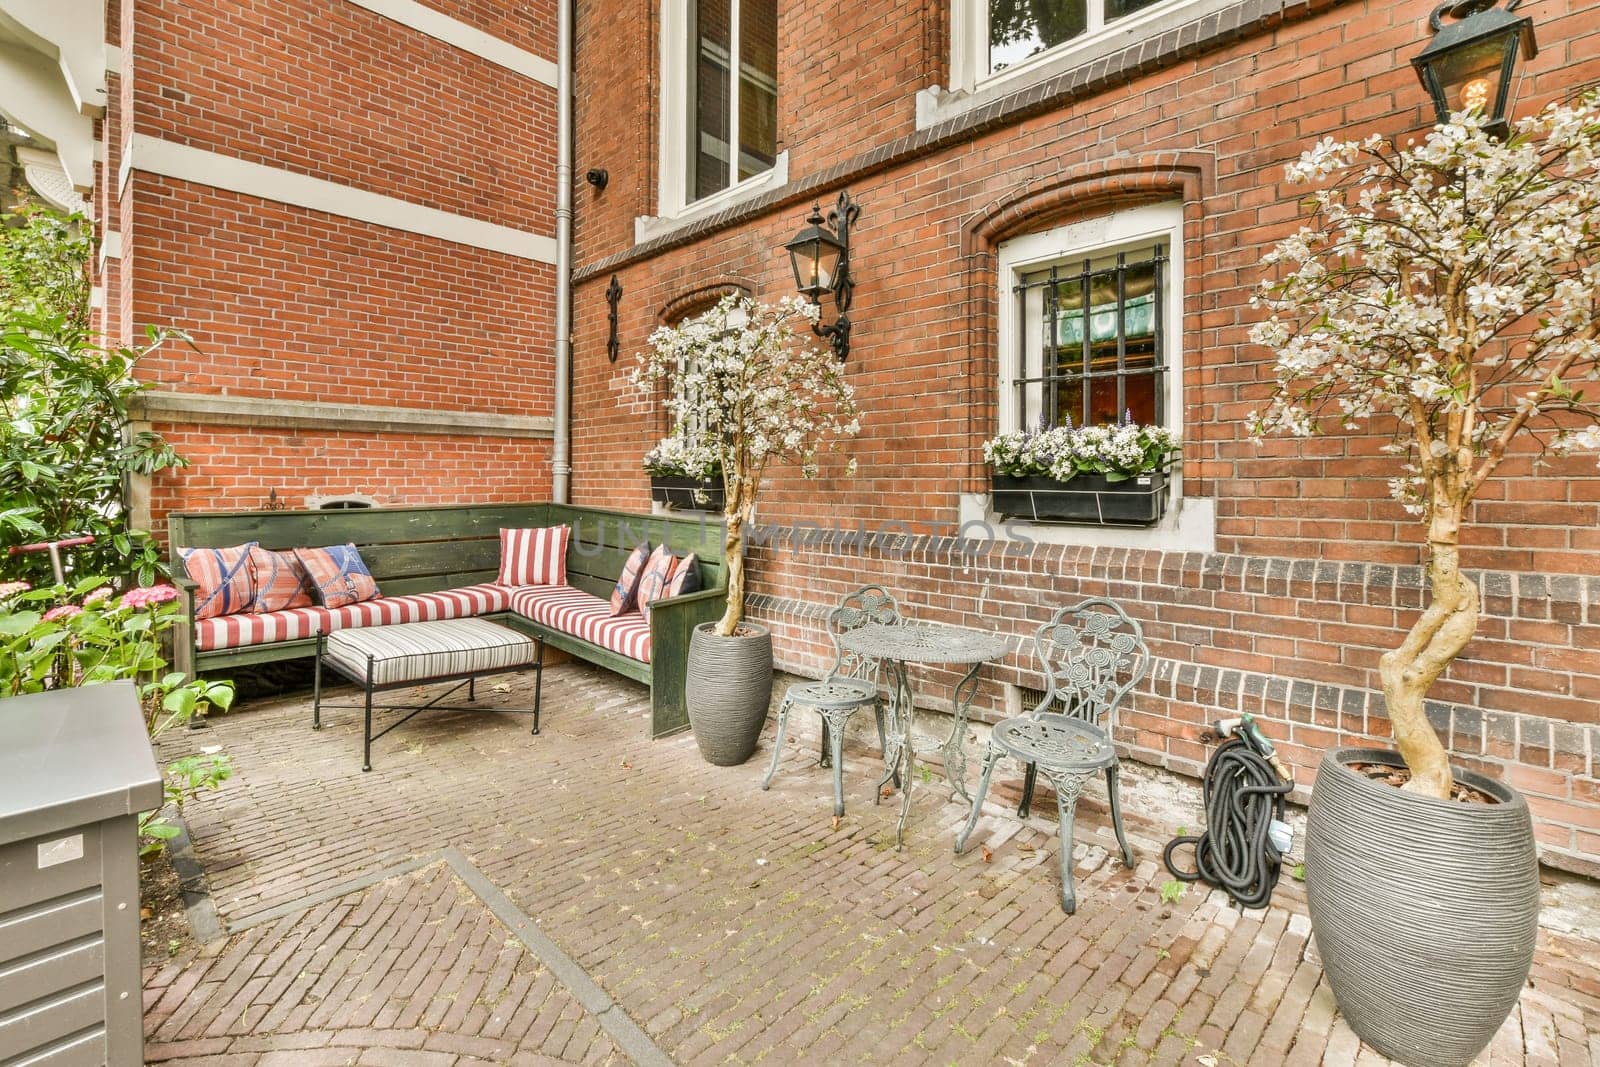 an outside area with furniture and flowers on the side of a brick building, in front of a green bench